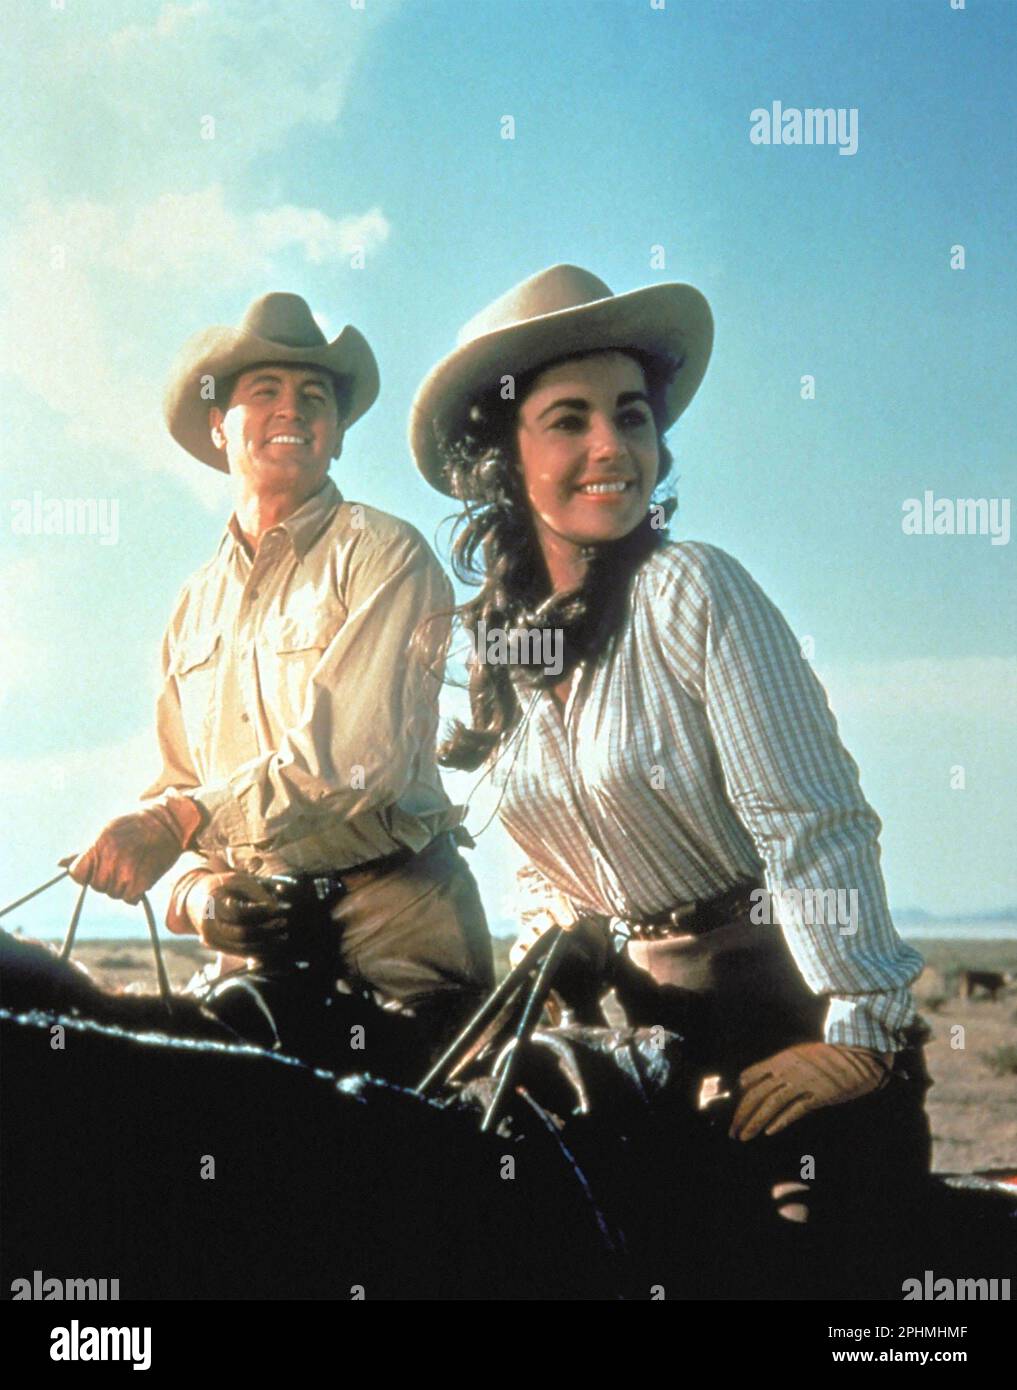 GIANT  1956 Warner Bros. Pictures film with Elizabeth Taylor and Rock Hudson Stock Photo